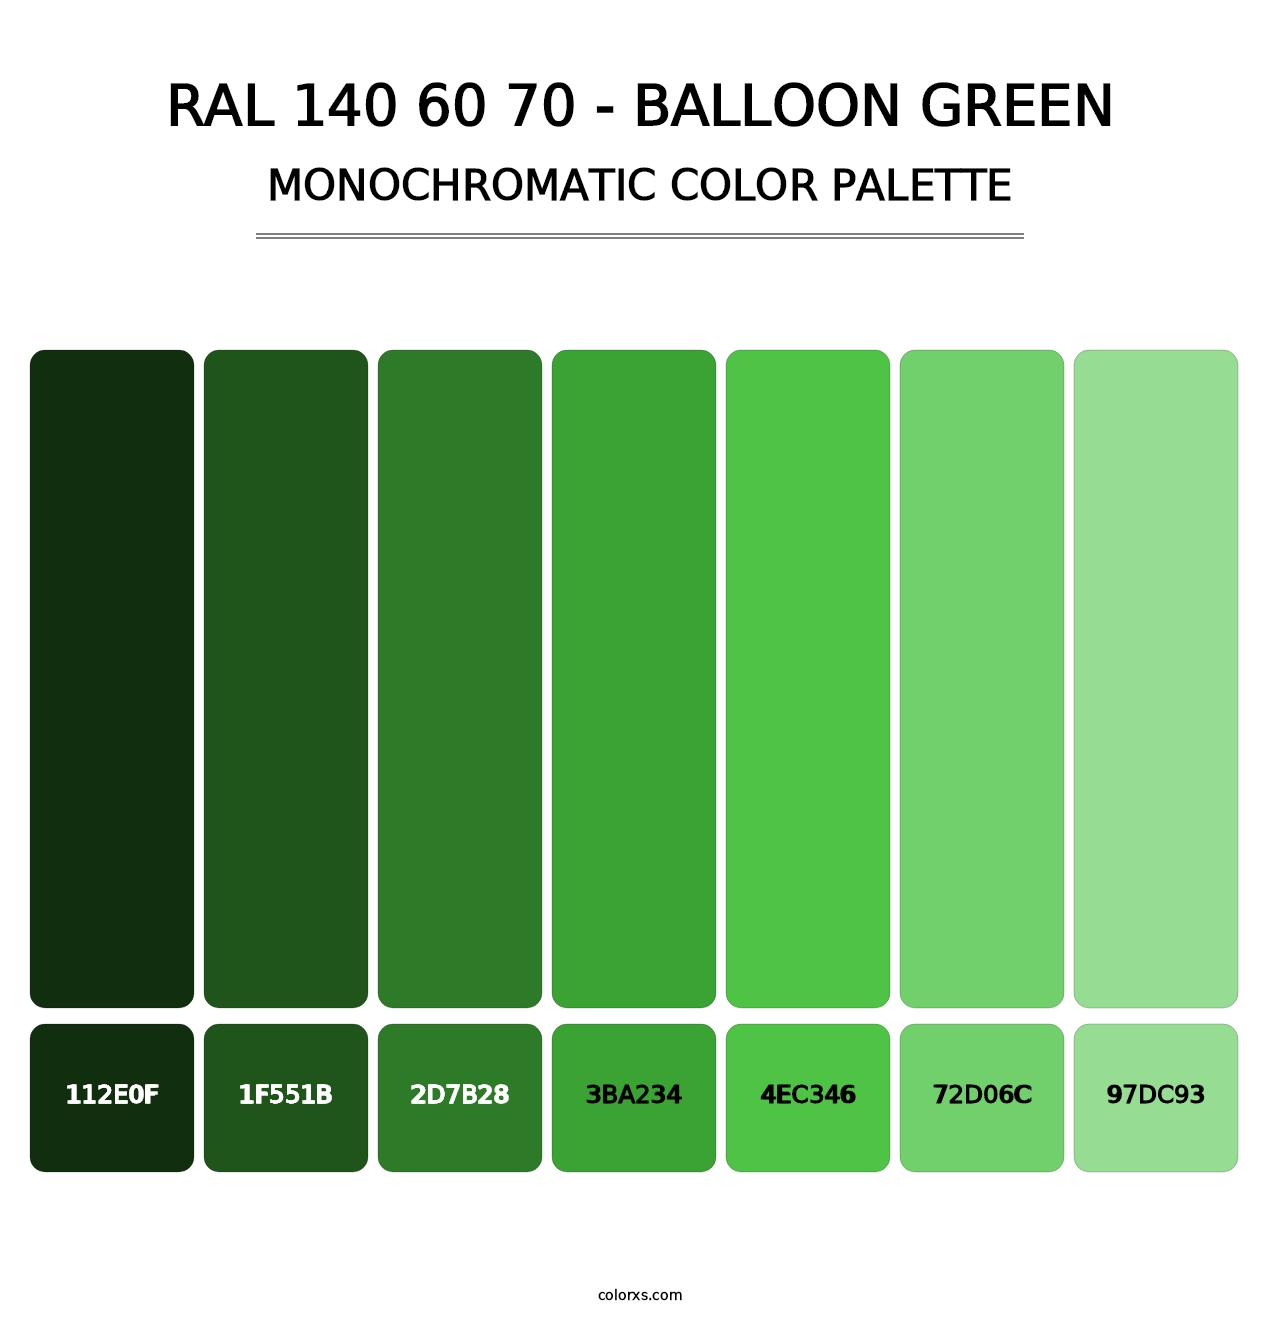 RAL 140 60 70 - Balloon Green - Monochromatic Color Palette